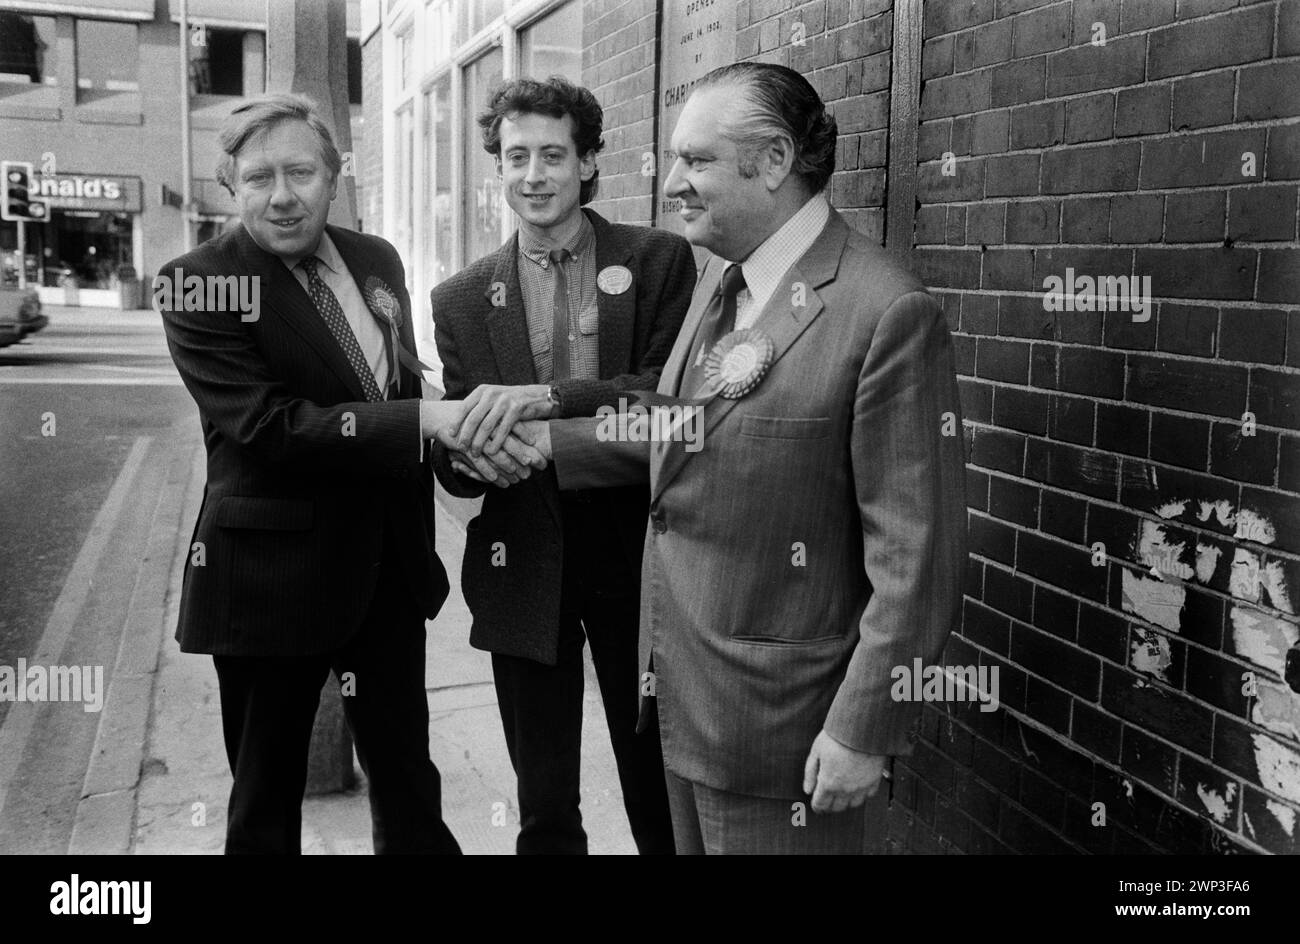 London, England February 1983. Peter Tatchell the Gay Rights campaigner seeks to be elected at the Bermondsey by election South London to the Labour Party as a MP.  Roy Hattersley MP, (L) Peter Tatchell (C) and Bob Mellish MP, (R) who is retiring as the Labour party MP electioneering in Bermondsey. 1980s HOMER SYKES Stock Photo